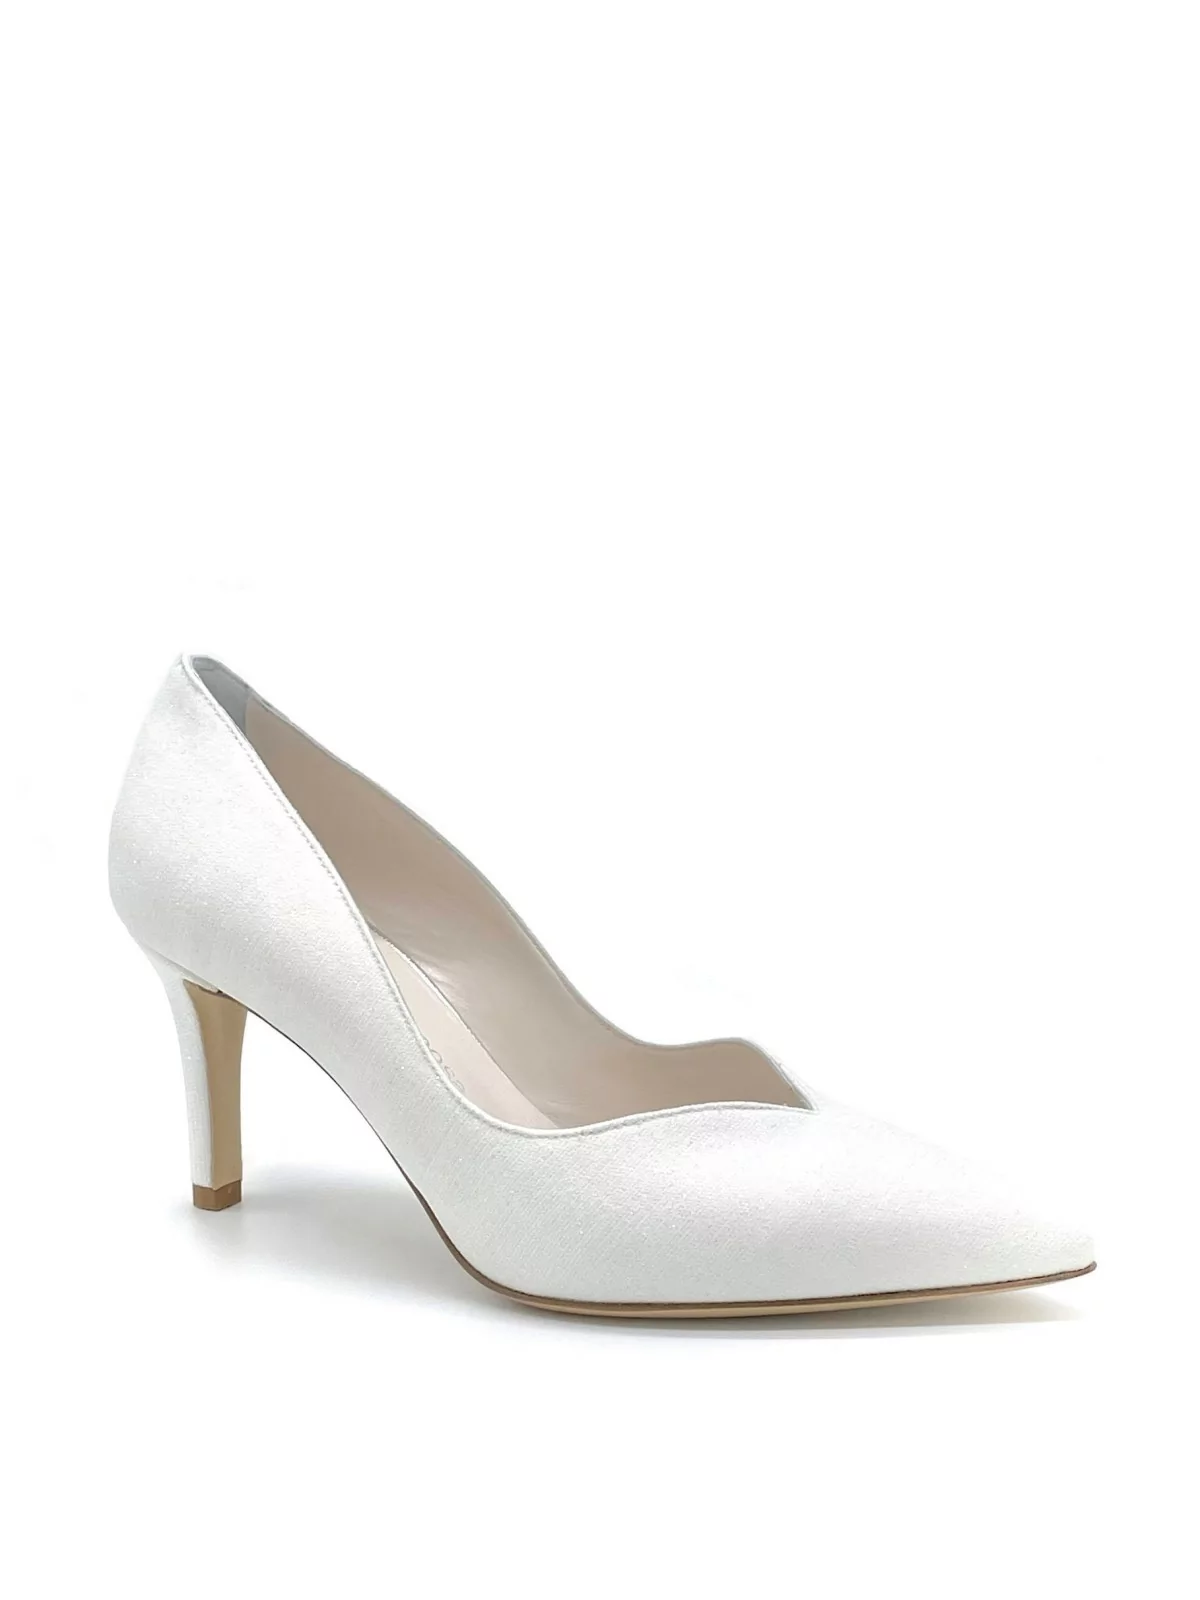 White laminate fabric pump with a sweetheart collar. Leather lining. Leather sol